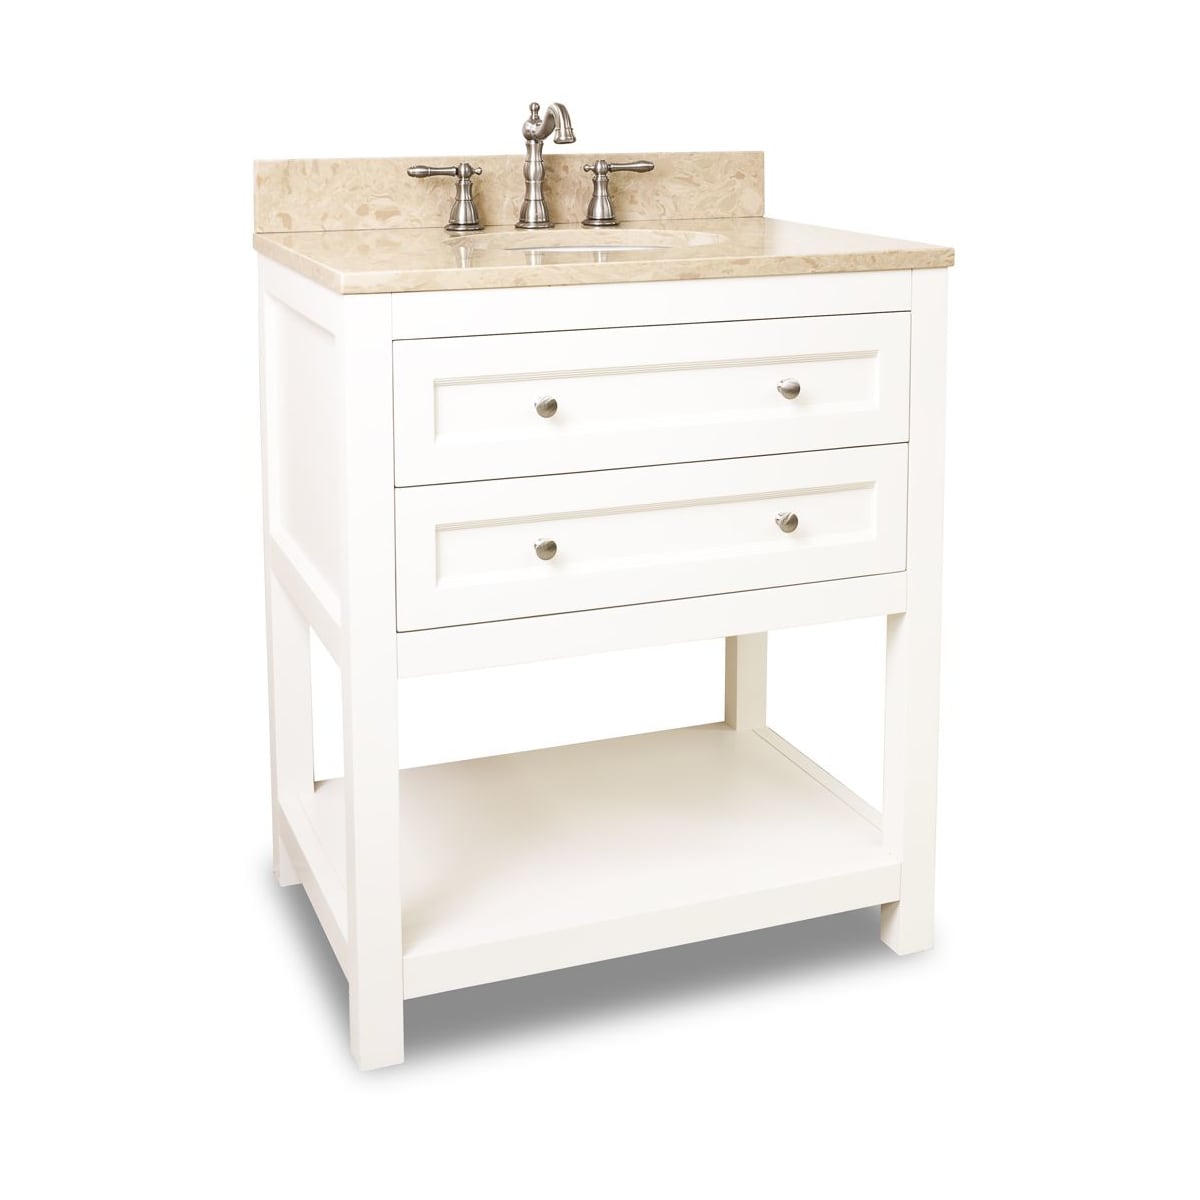 Inch Bathroom Vanity Cabinet, 30 Inch White Bathroom Vanity Without Top